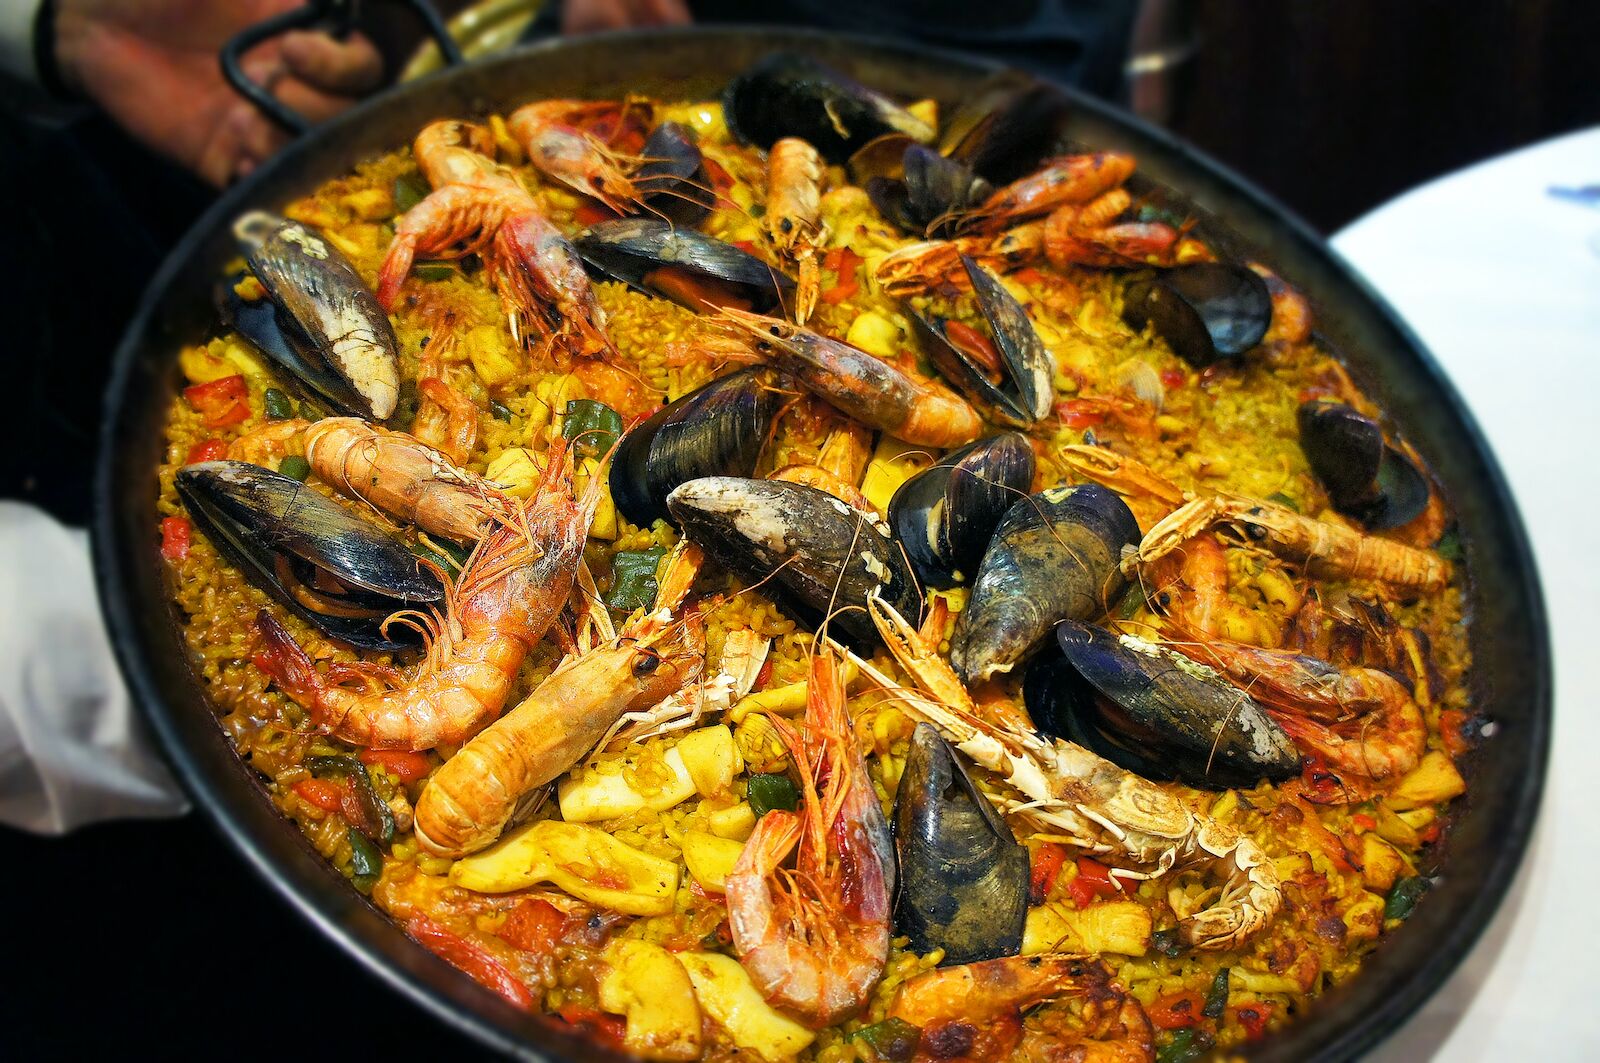 paella is a common Valencia food with mussels rice and shrimp